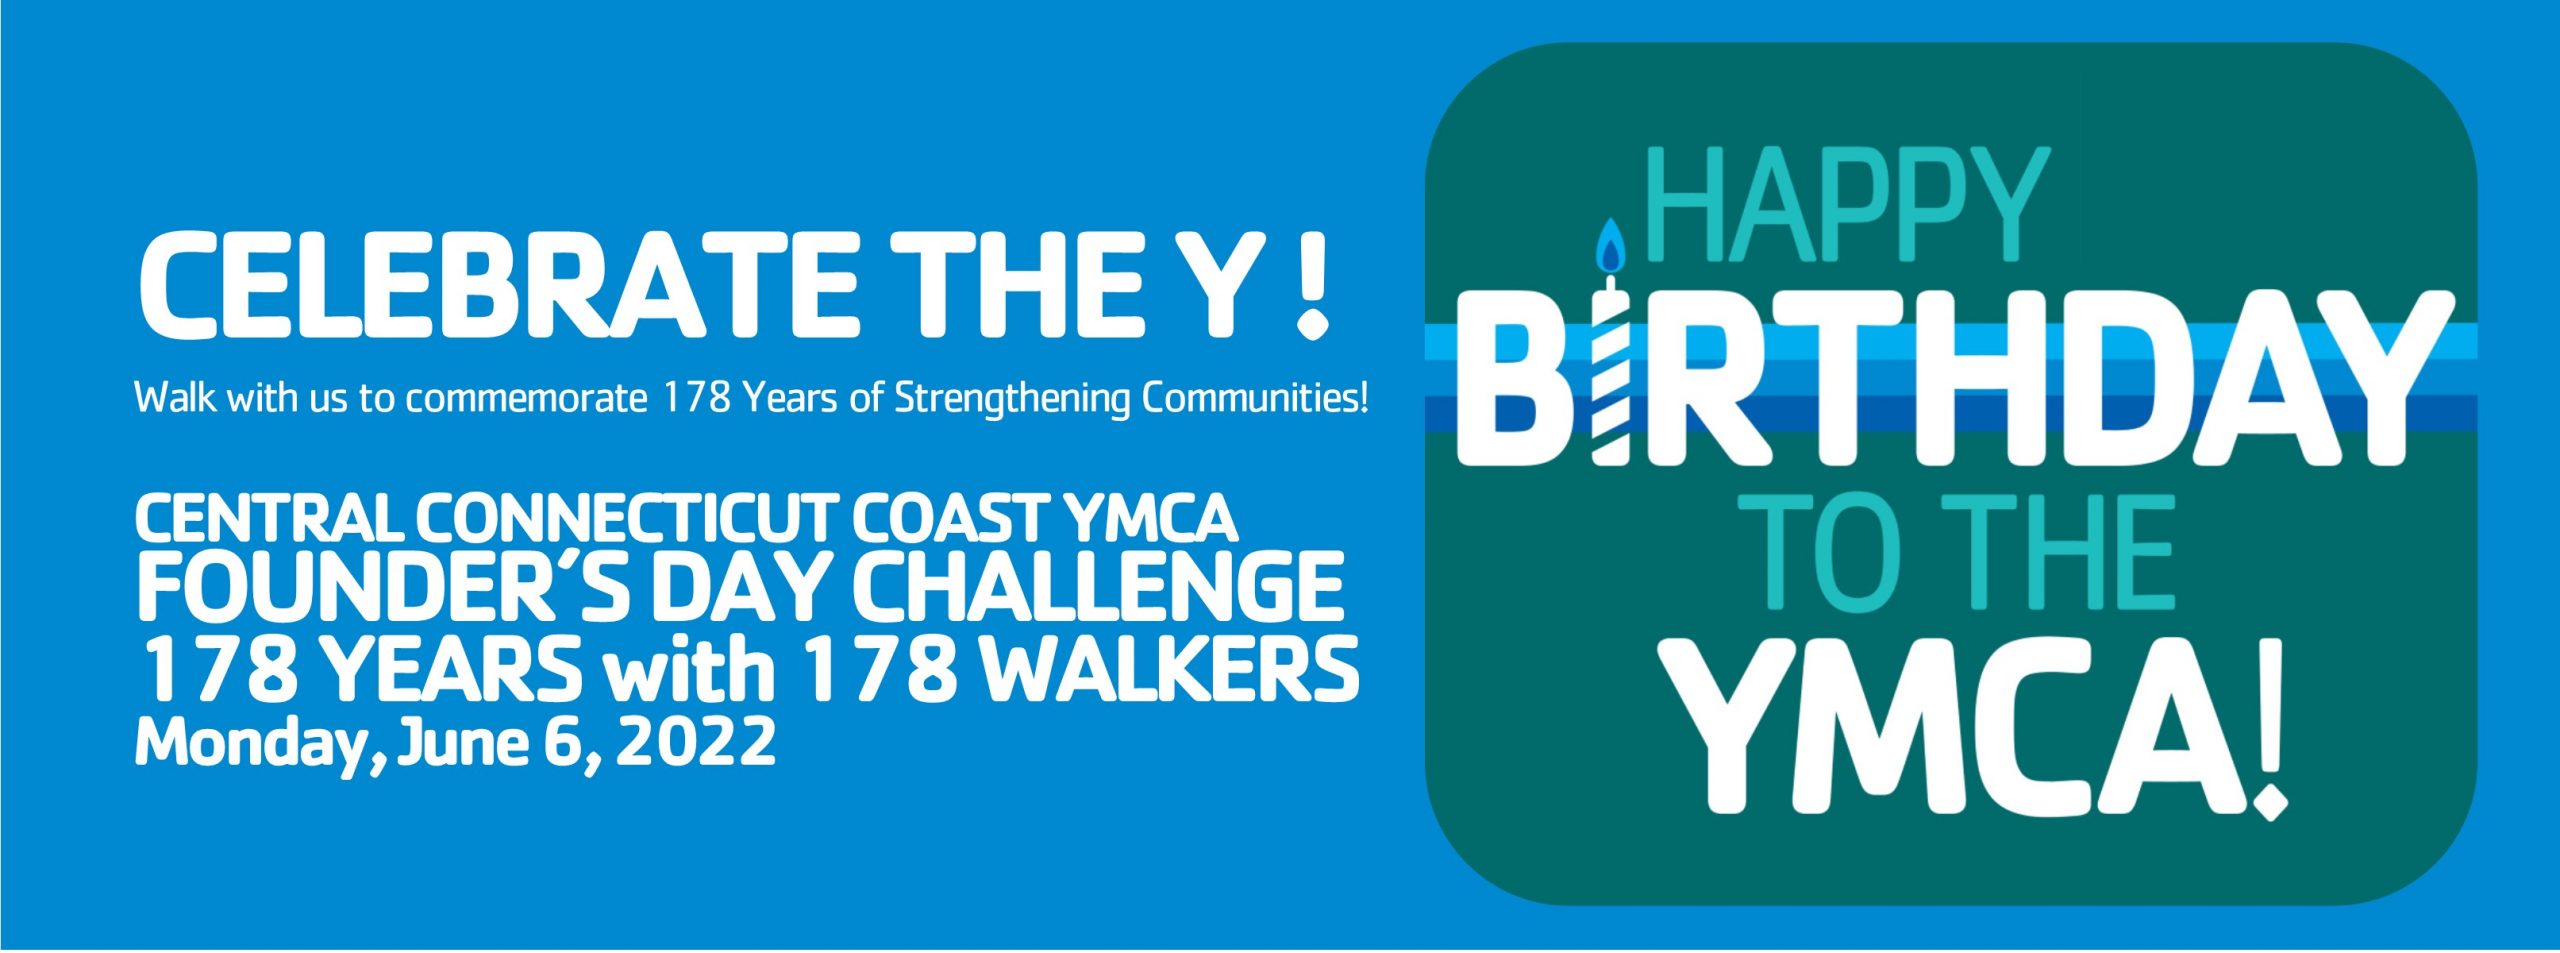 CELEBRATE THE Y!